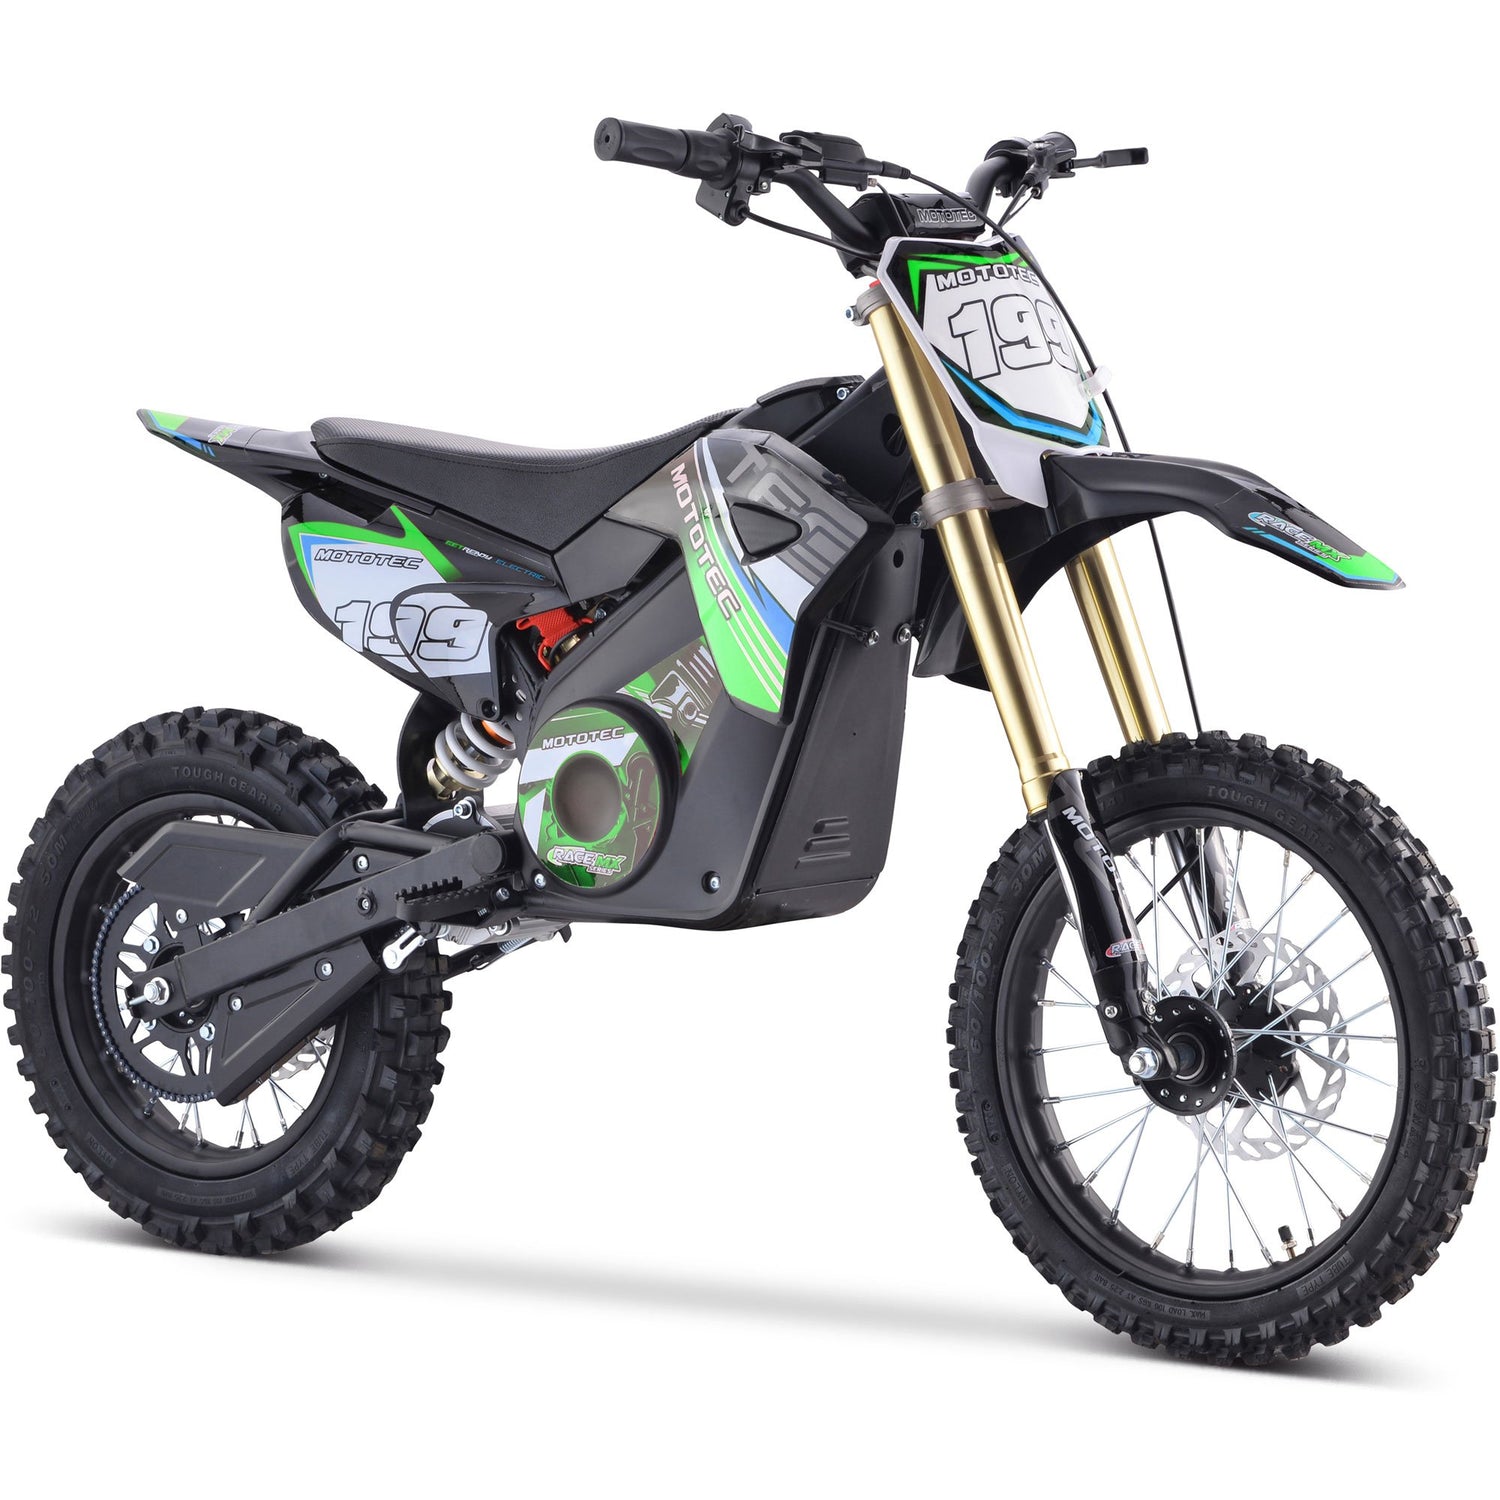 Introducing the New MotoTec 48v 1600w Lithium Pro Electric Dirt Bike!